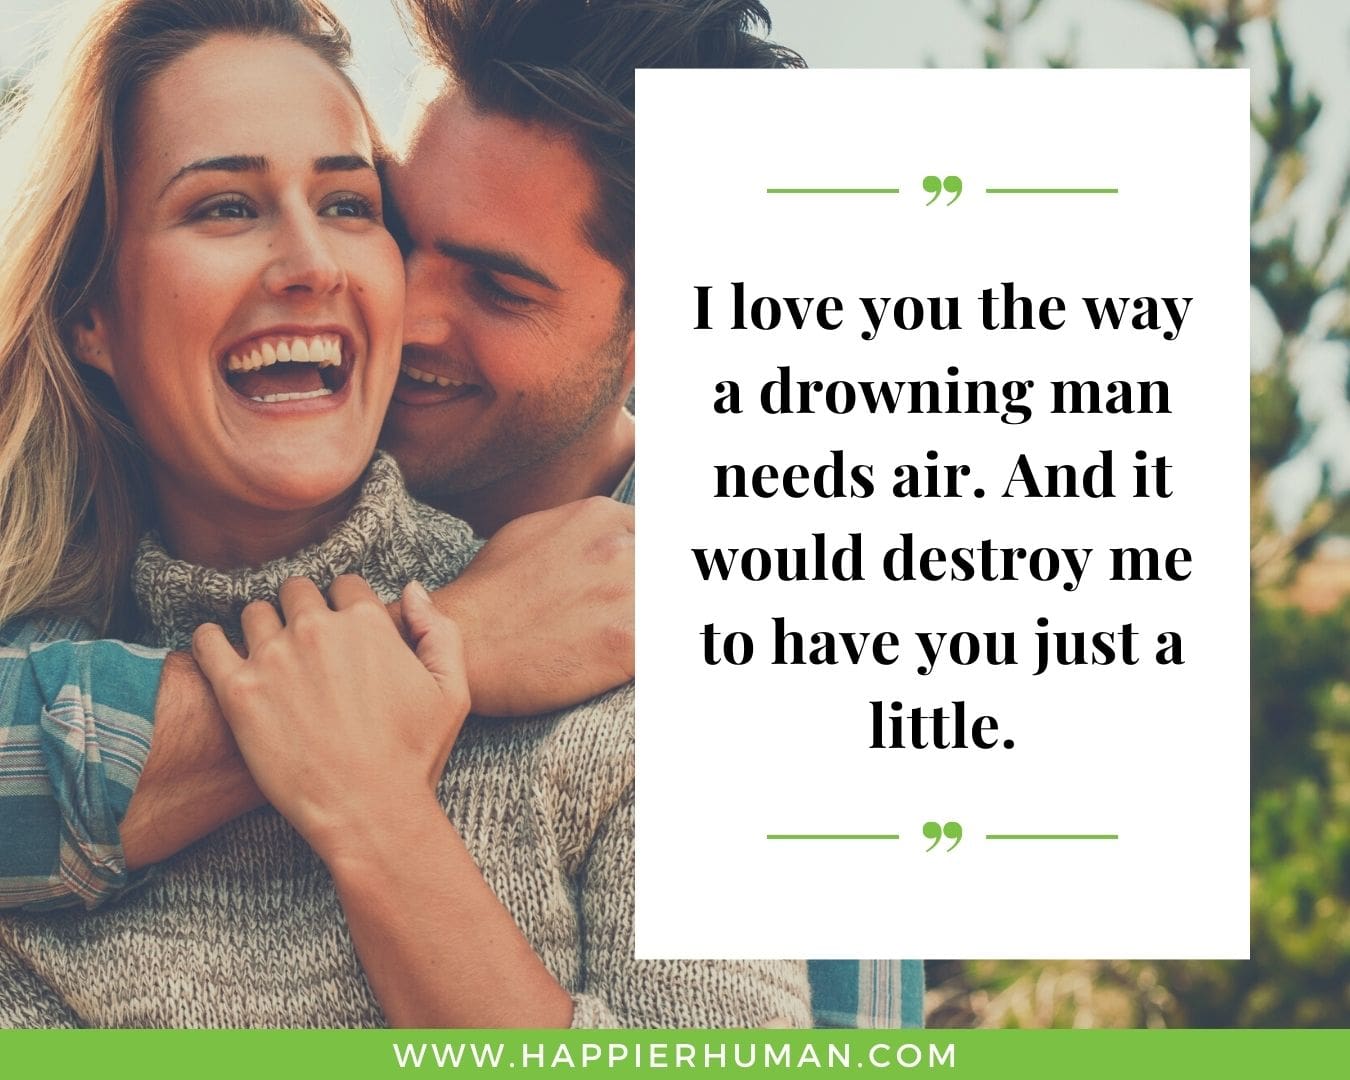 Romantic love quotes- “I love you the way a drowning man needs air. And it would destroy me to have you just a little.